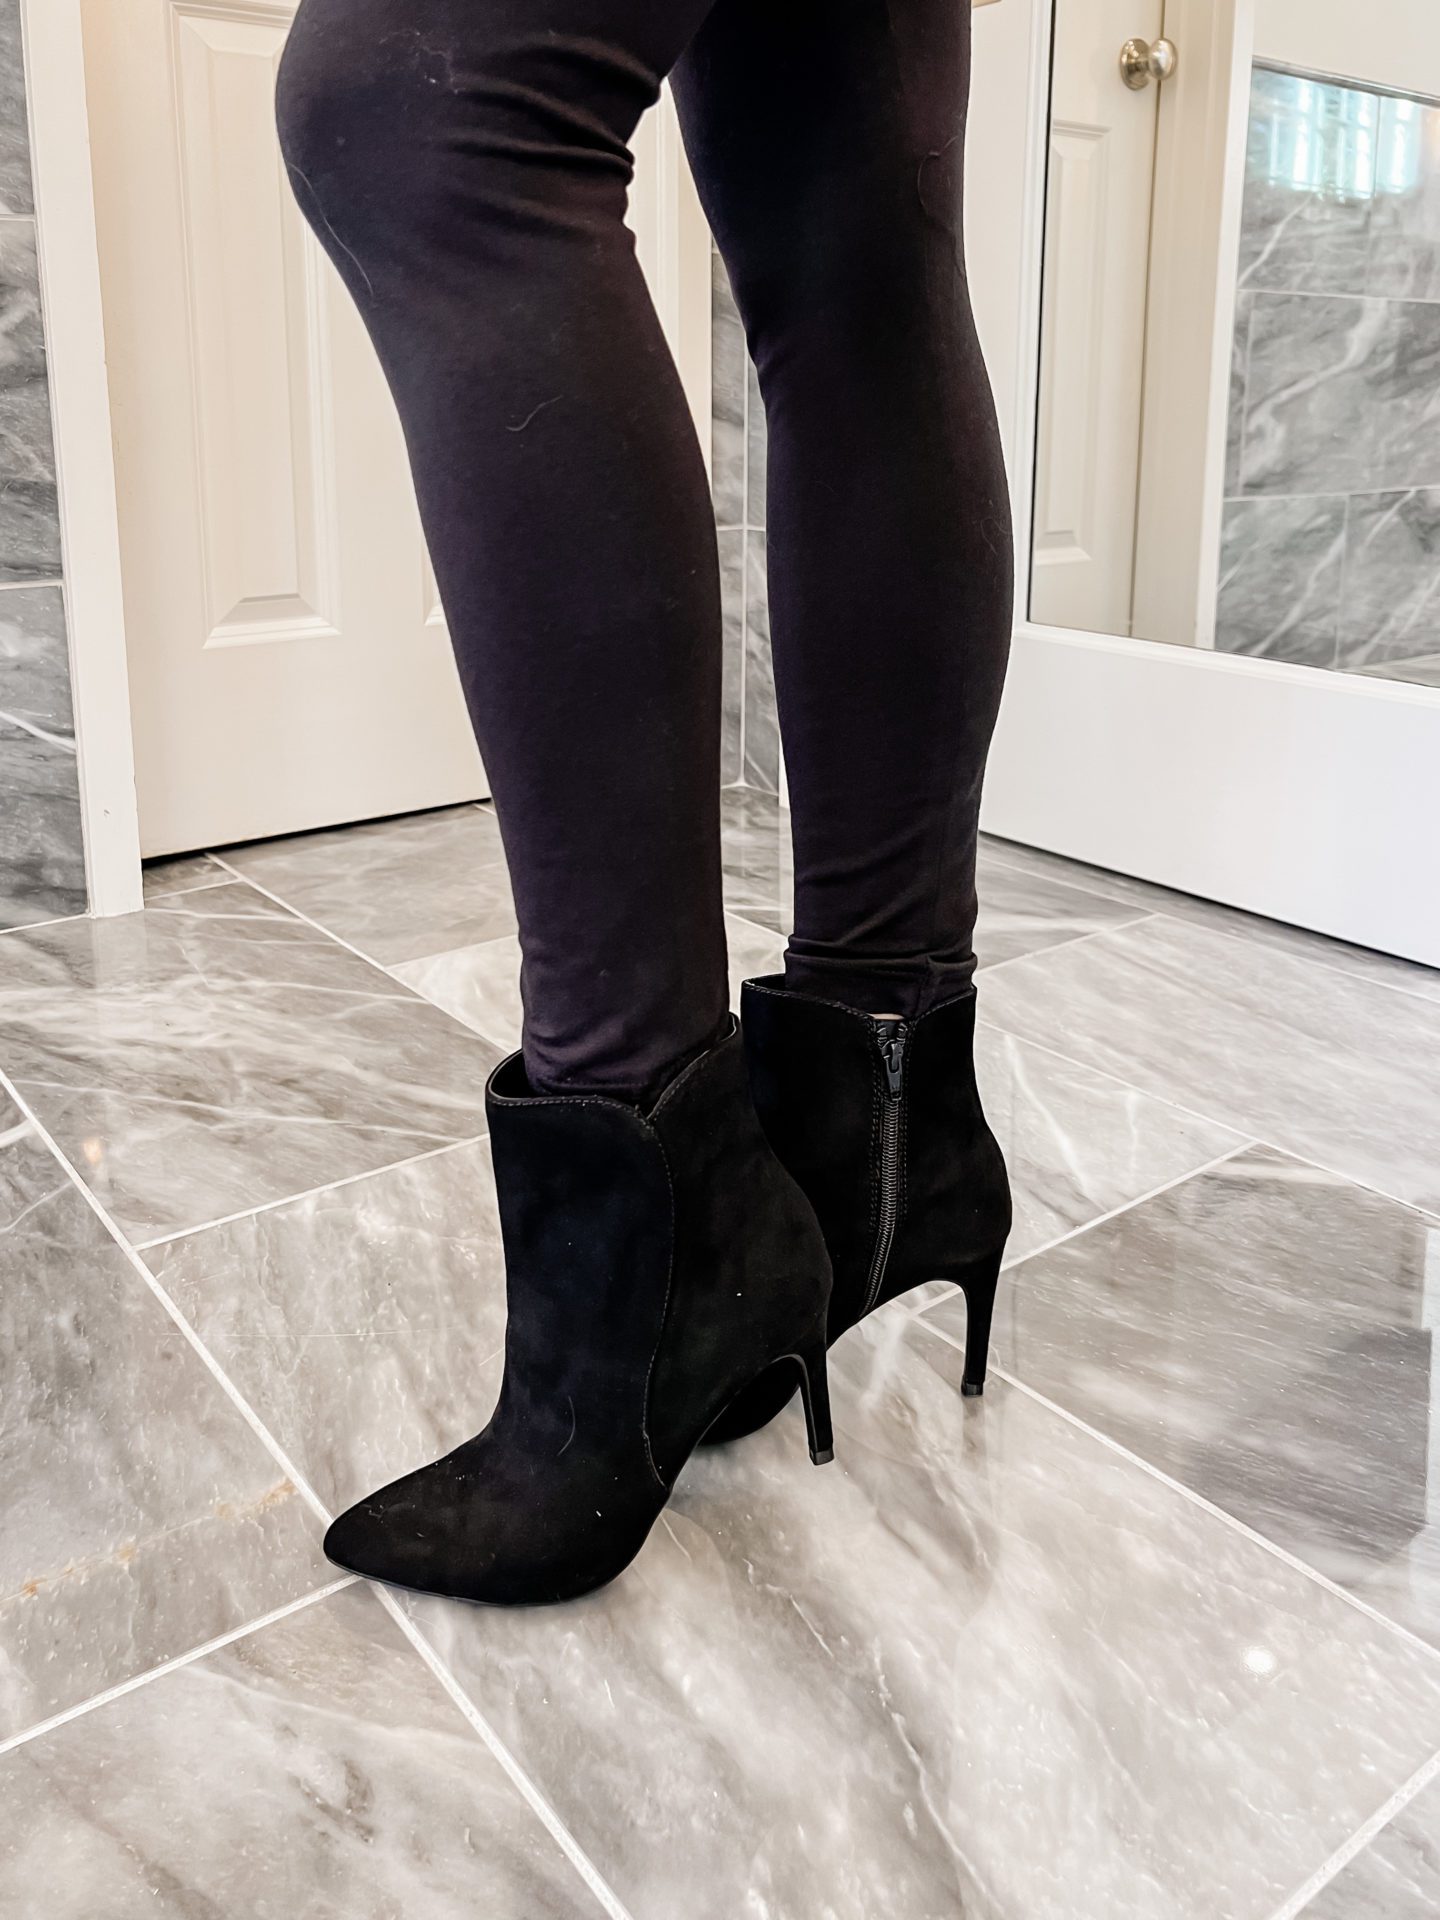 These black Walmart booties are comfortable and affordable. A great holiday bootie!